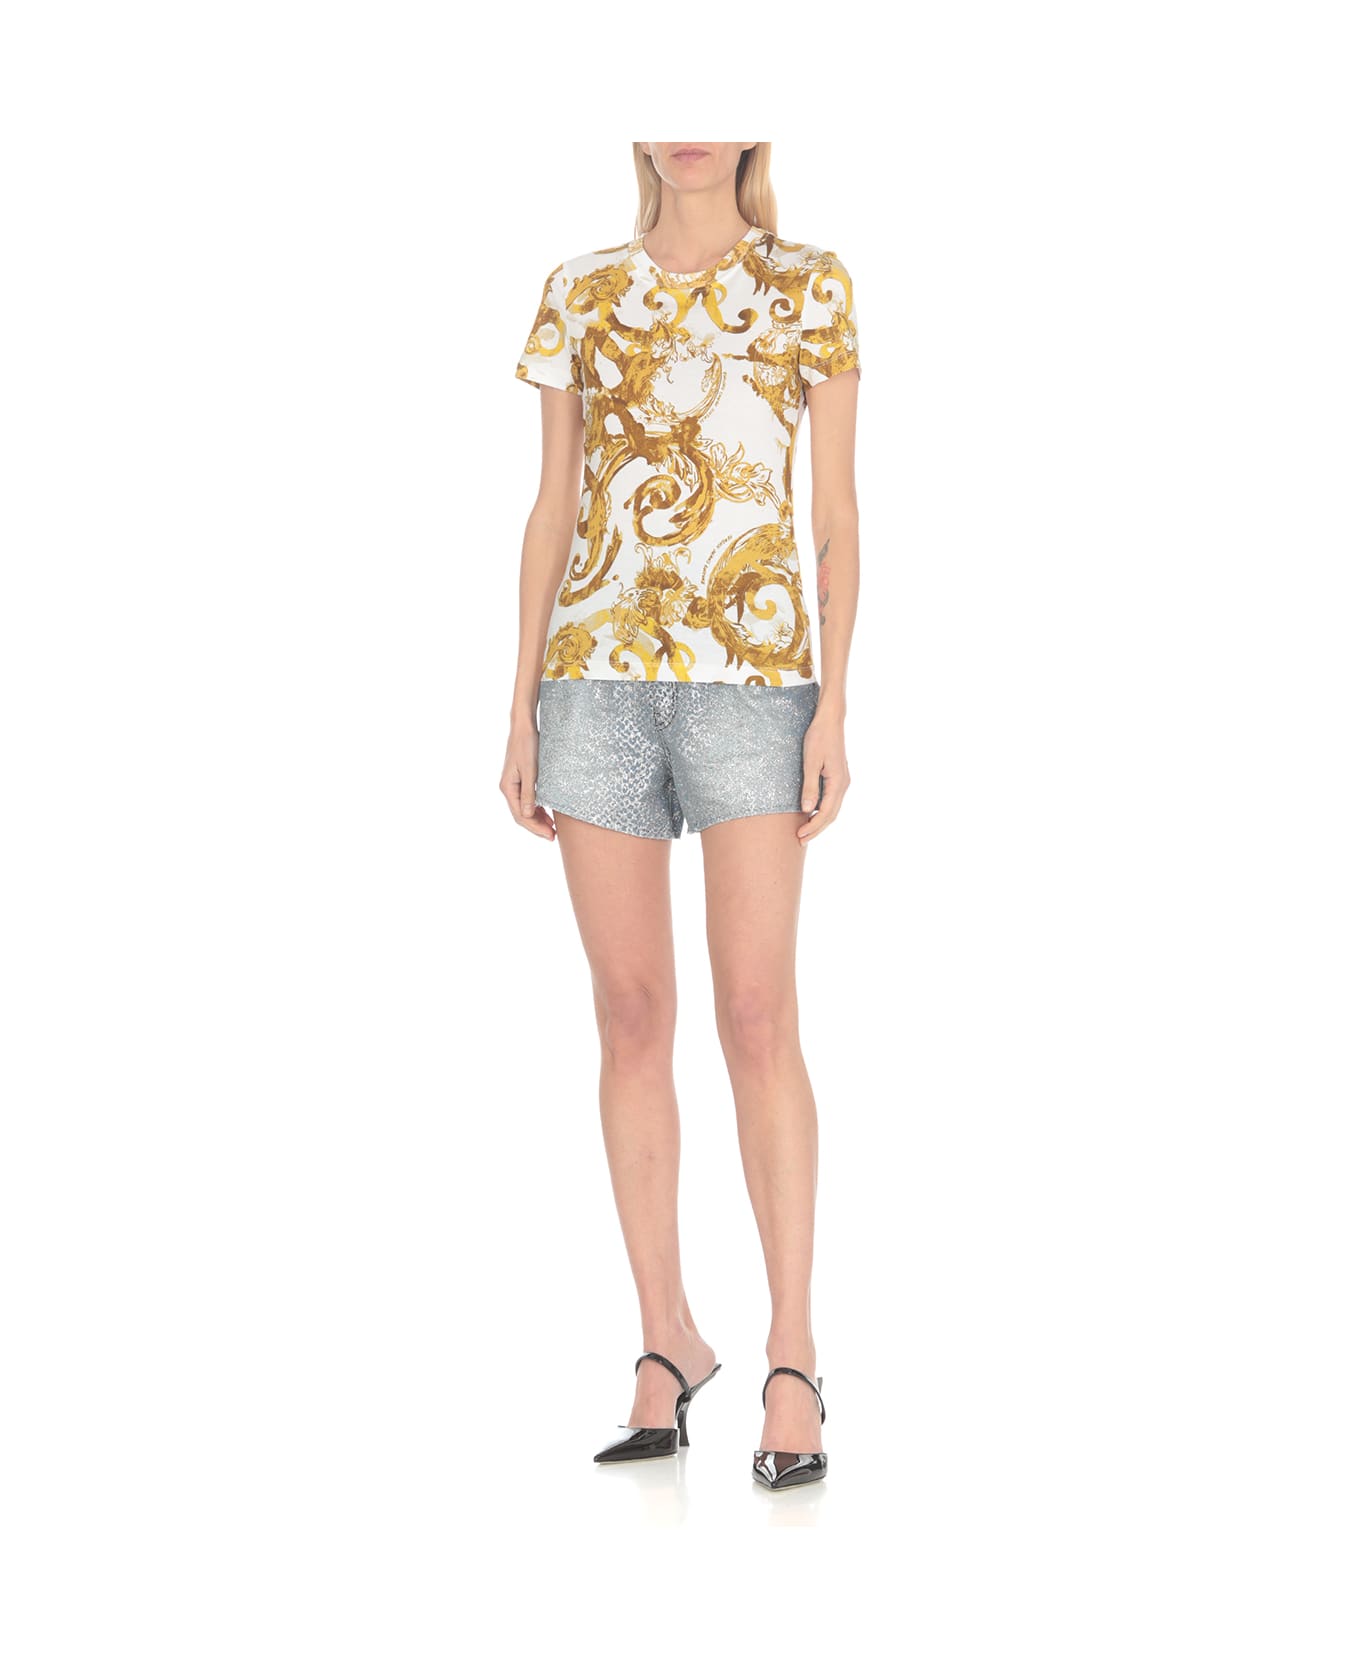 Versace Jeans Couture Watercolour Couture T-shirt - White